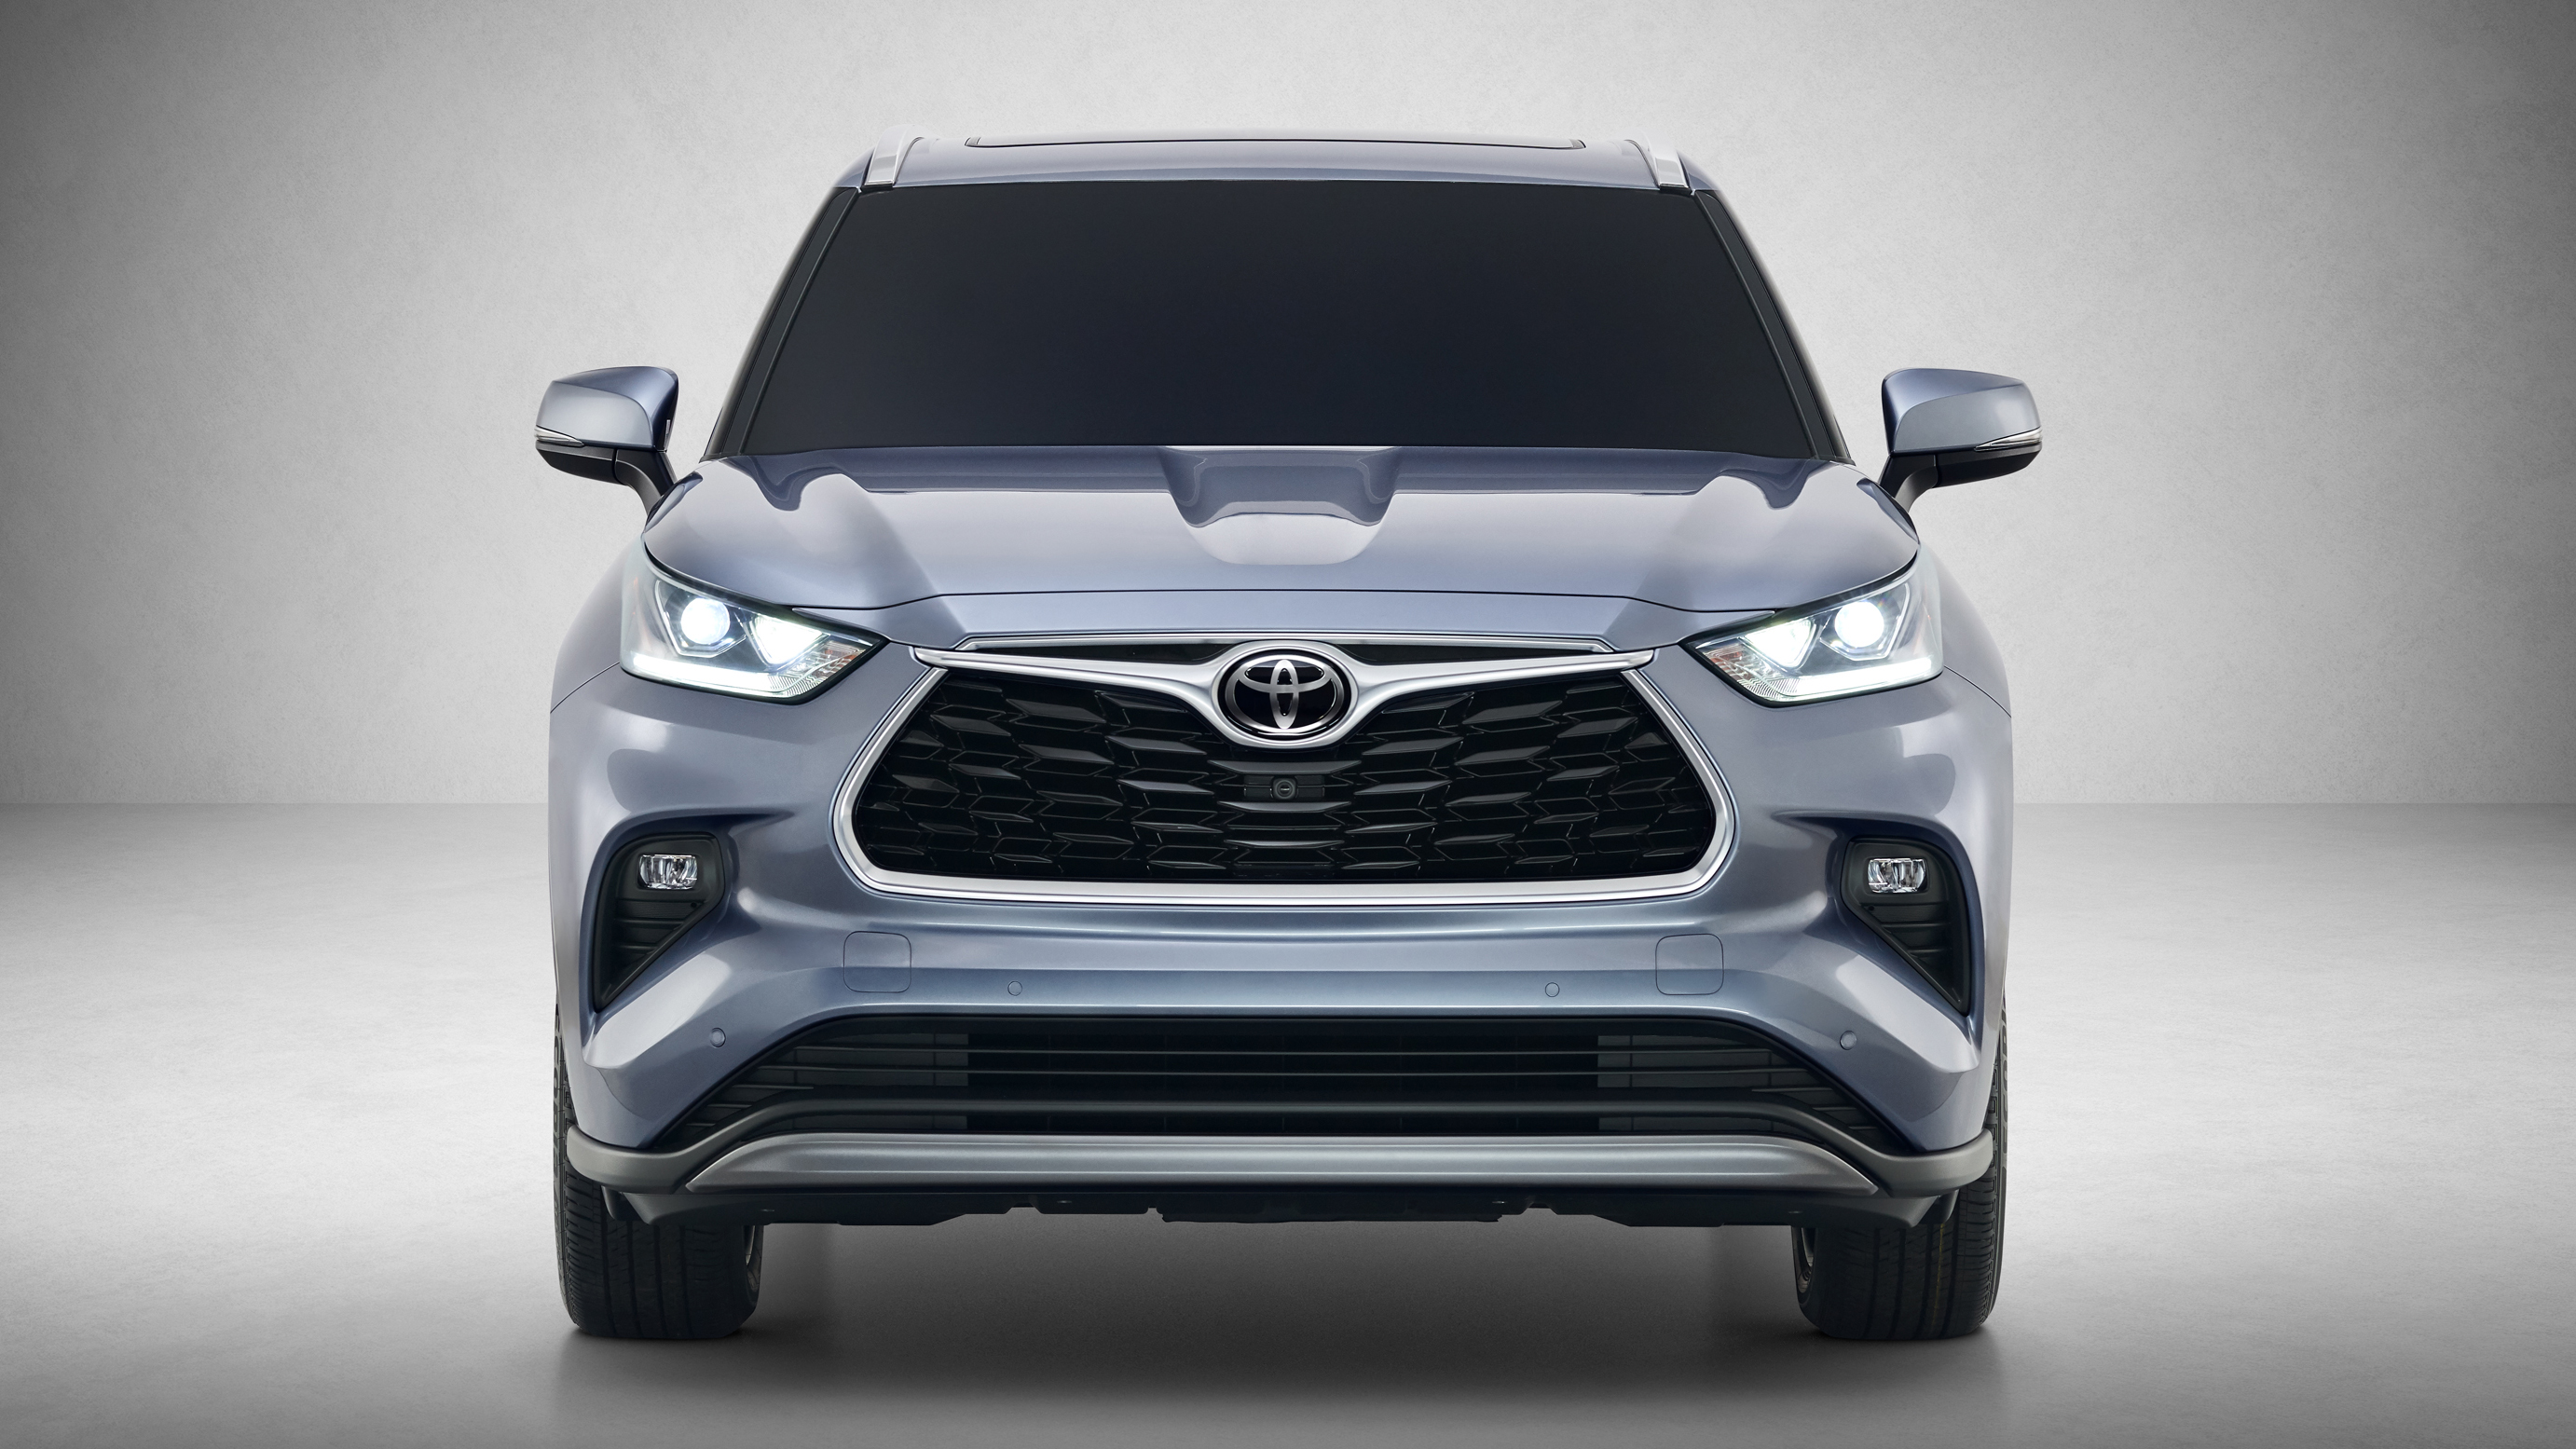 Toyota Kluger New Model 2021 Performance